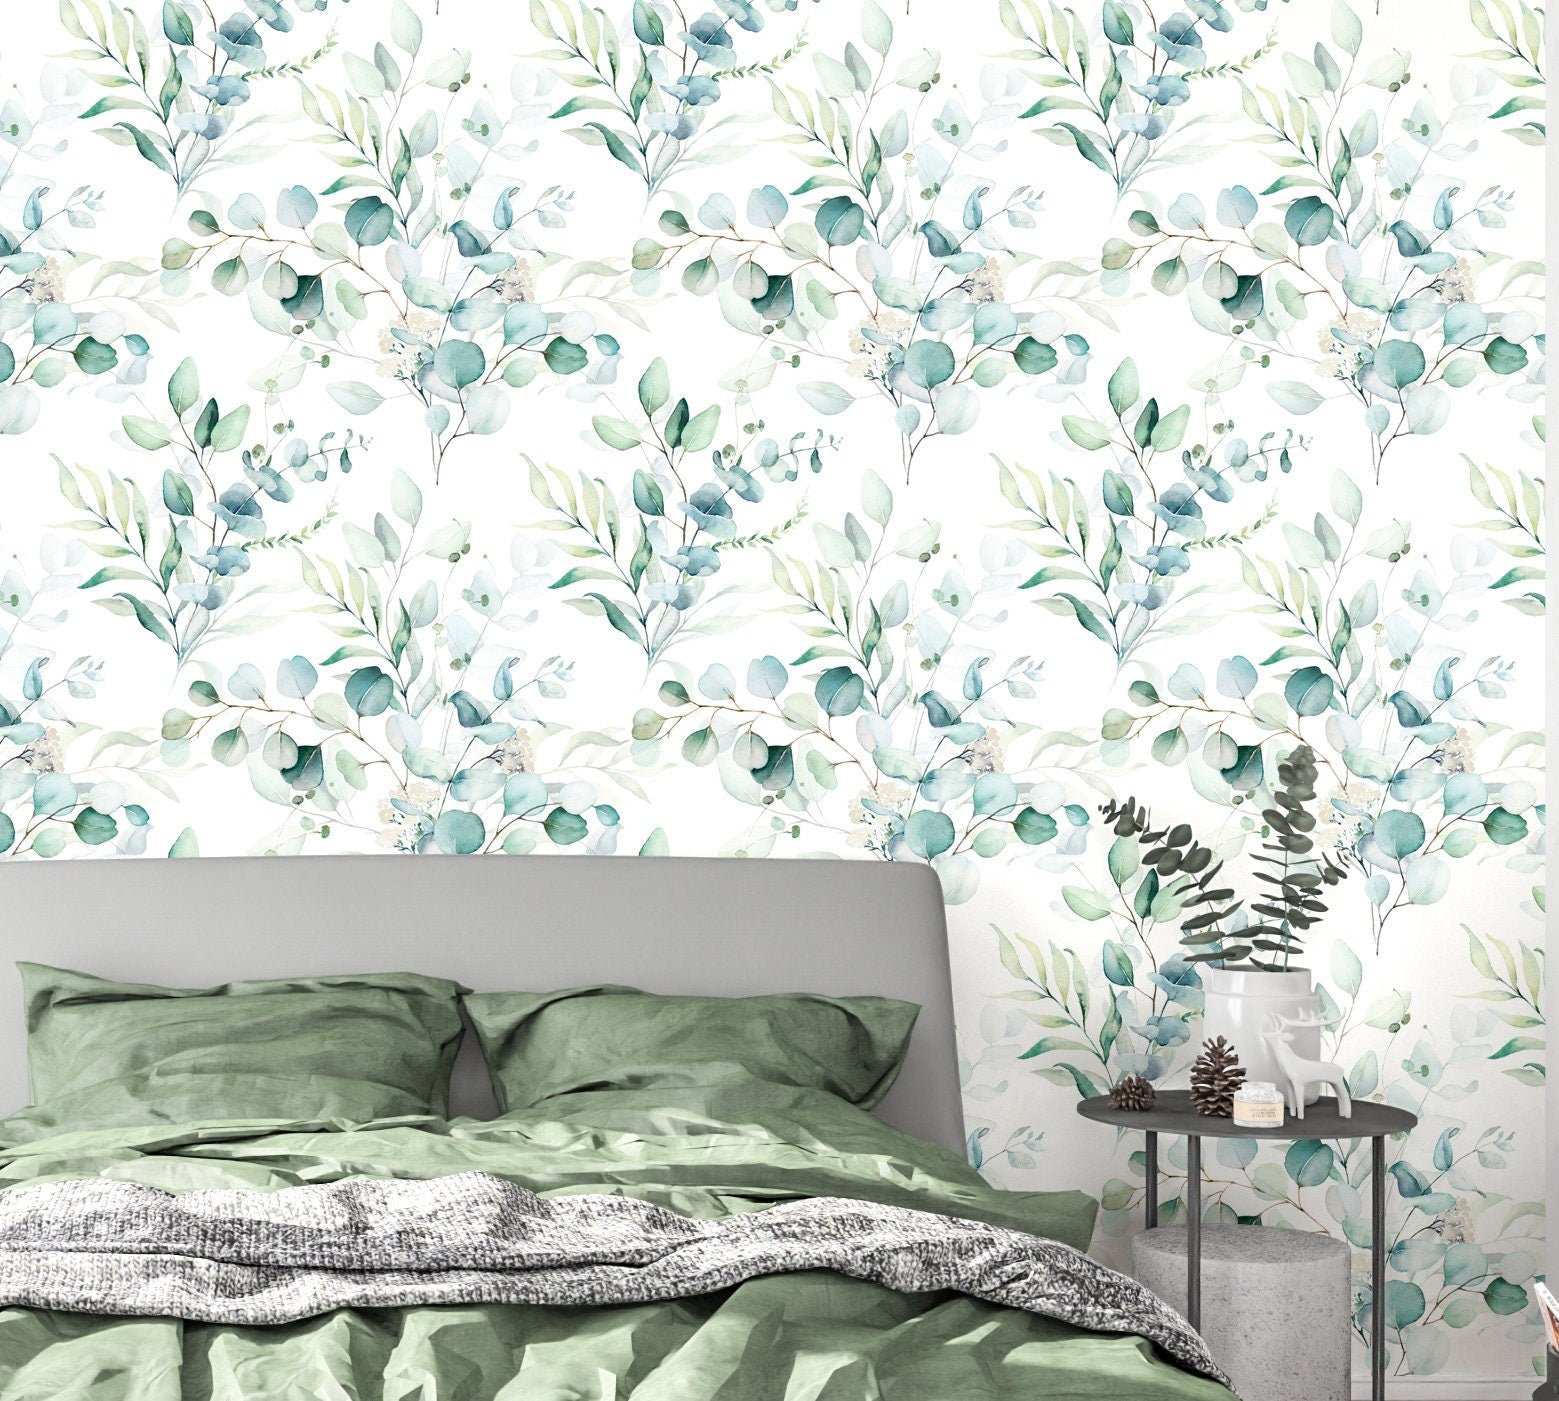 Green Leaves Wallpaper, Eucalyptus Wallpaper Peel and Stick, Botanical Wallpaper, Nursery Wallpapers, Removable Wall Paper